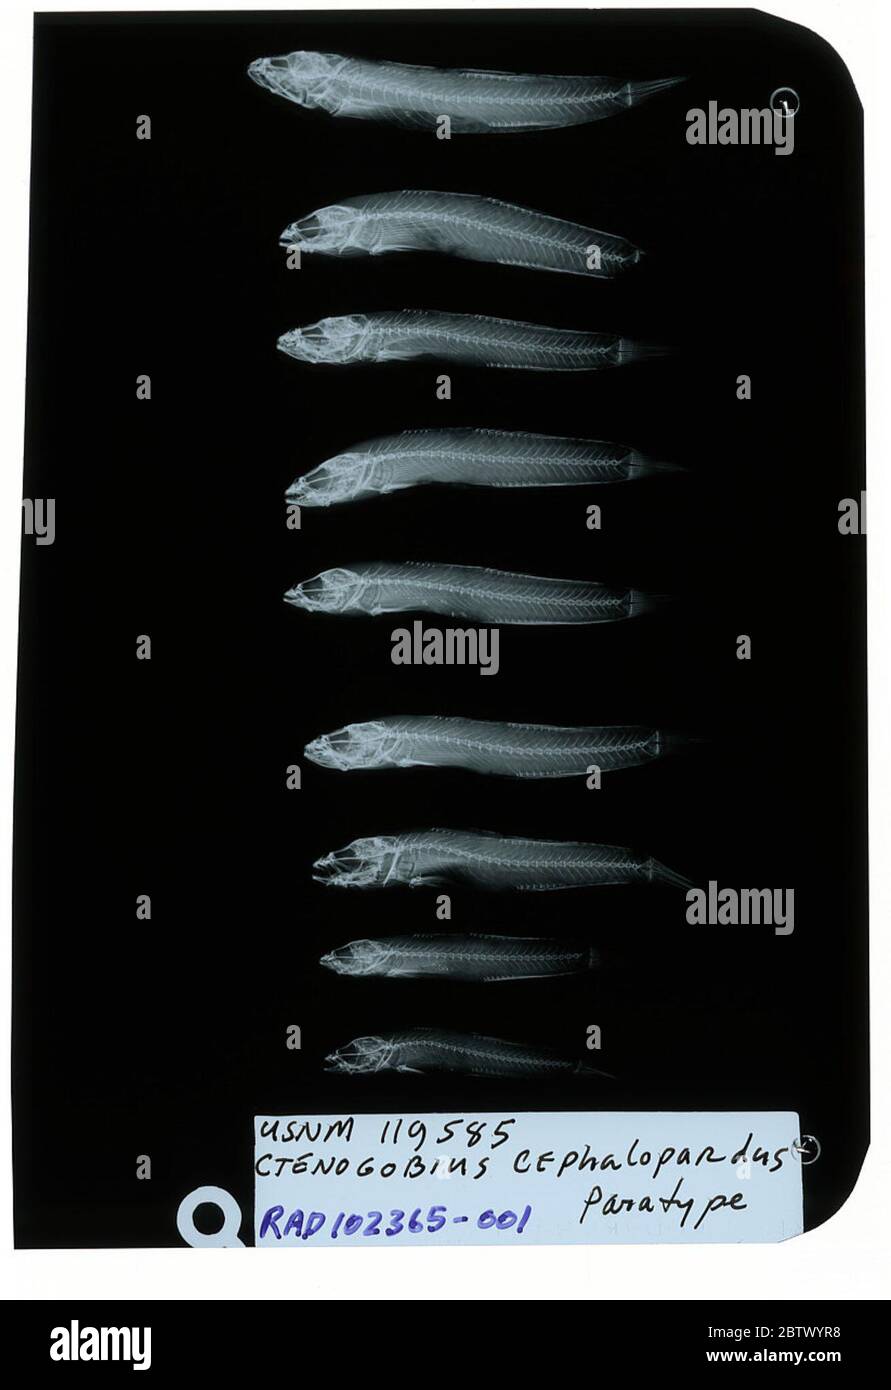 Ctenogobius cephalopardus. Radiograph is of a paratype; The Smithsonian NMNH Division of Fishes uses the convention of maintaining the original species name for type specimens designated at the time of description. The currently accepted name for this species is Rhinogobius mekongianus.1 Feb 20191 Stock Photo